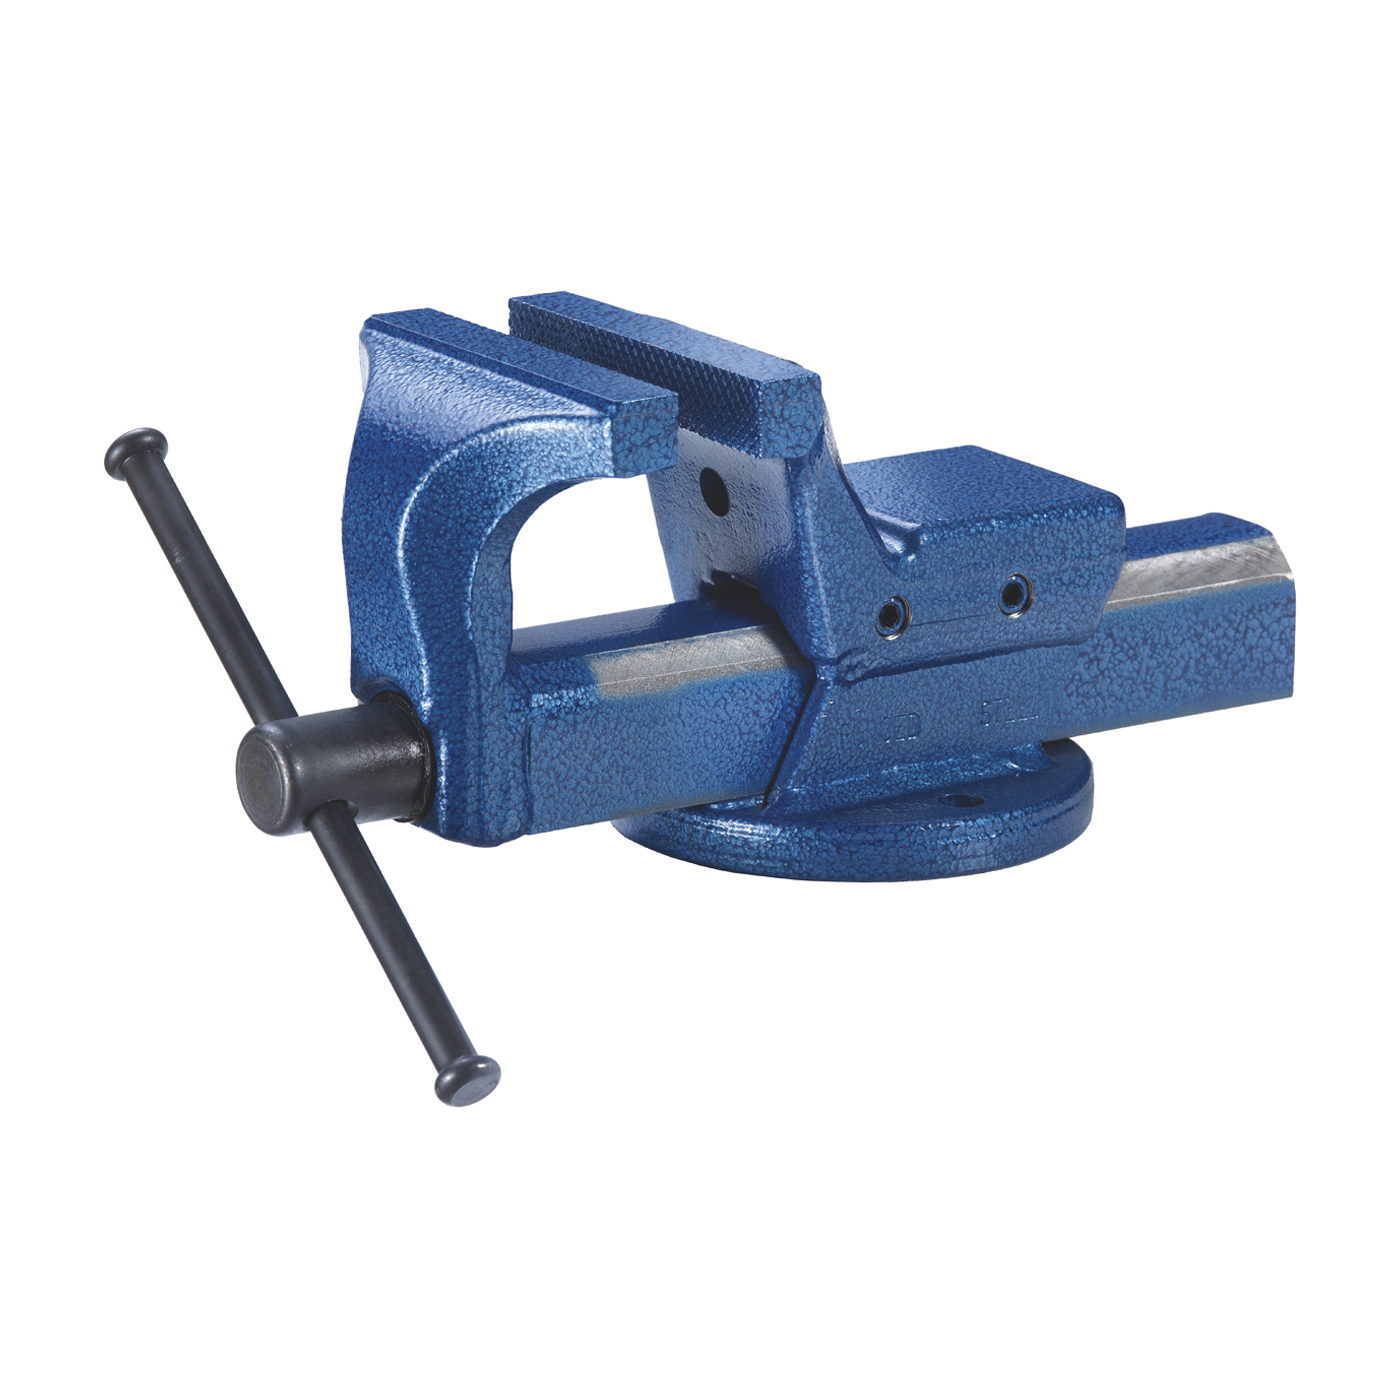 Parallel Vice, Jaw Width 100 mm - 1 piece